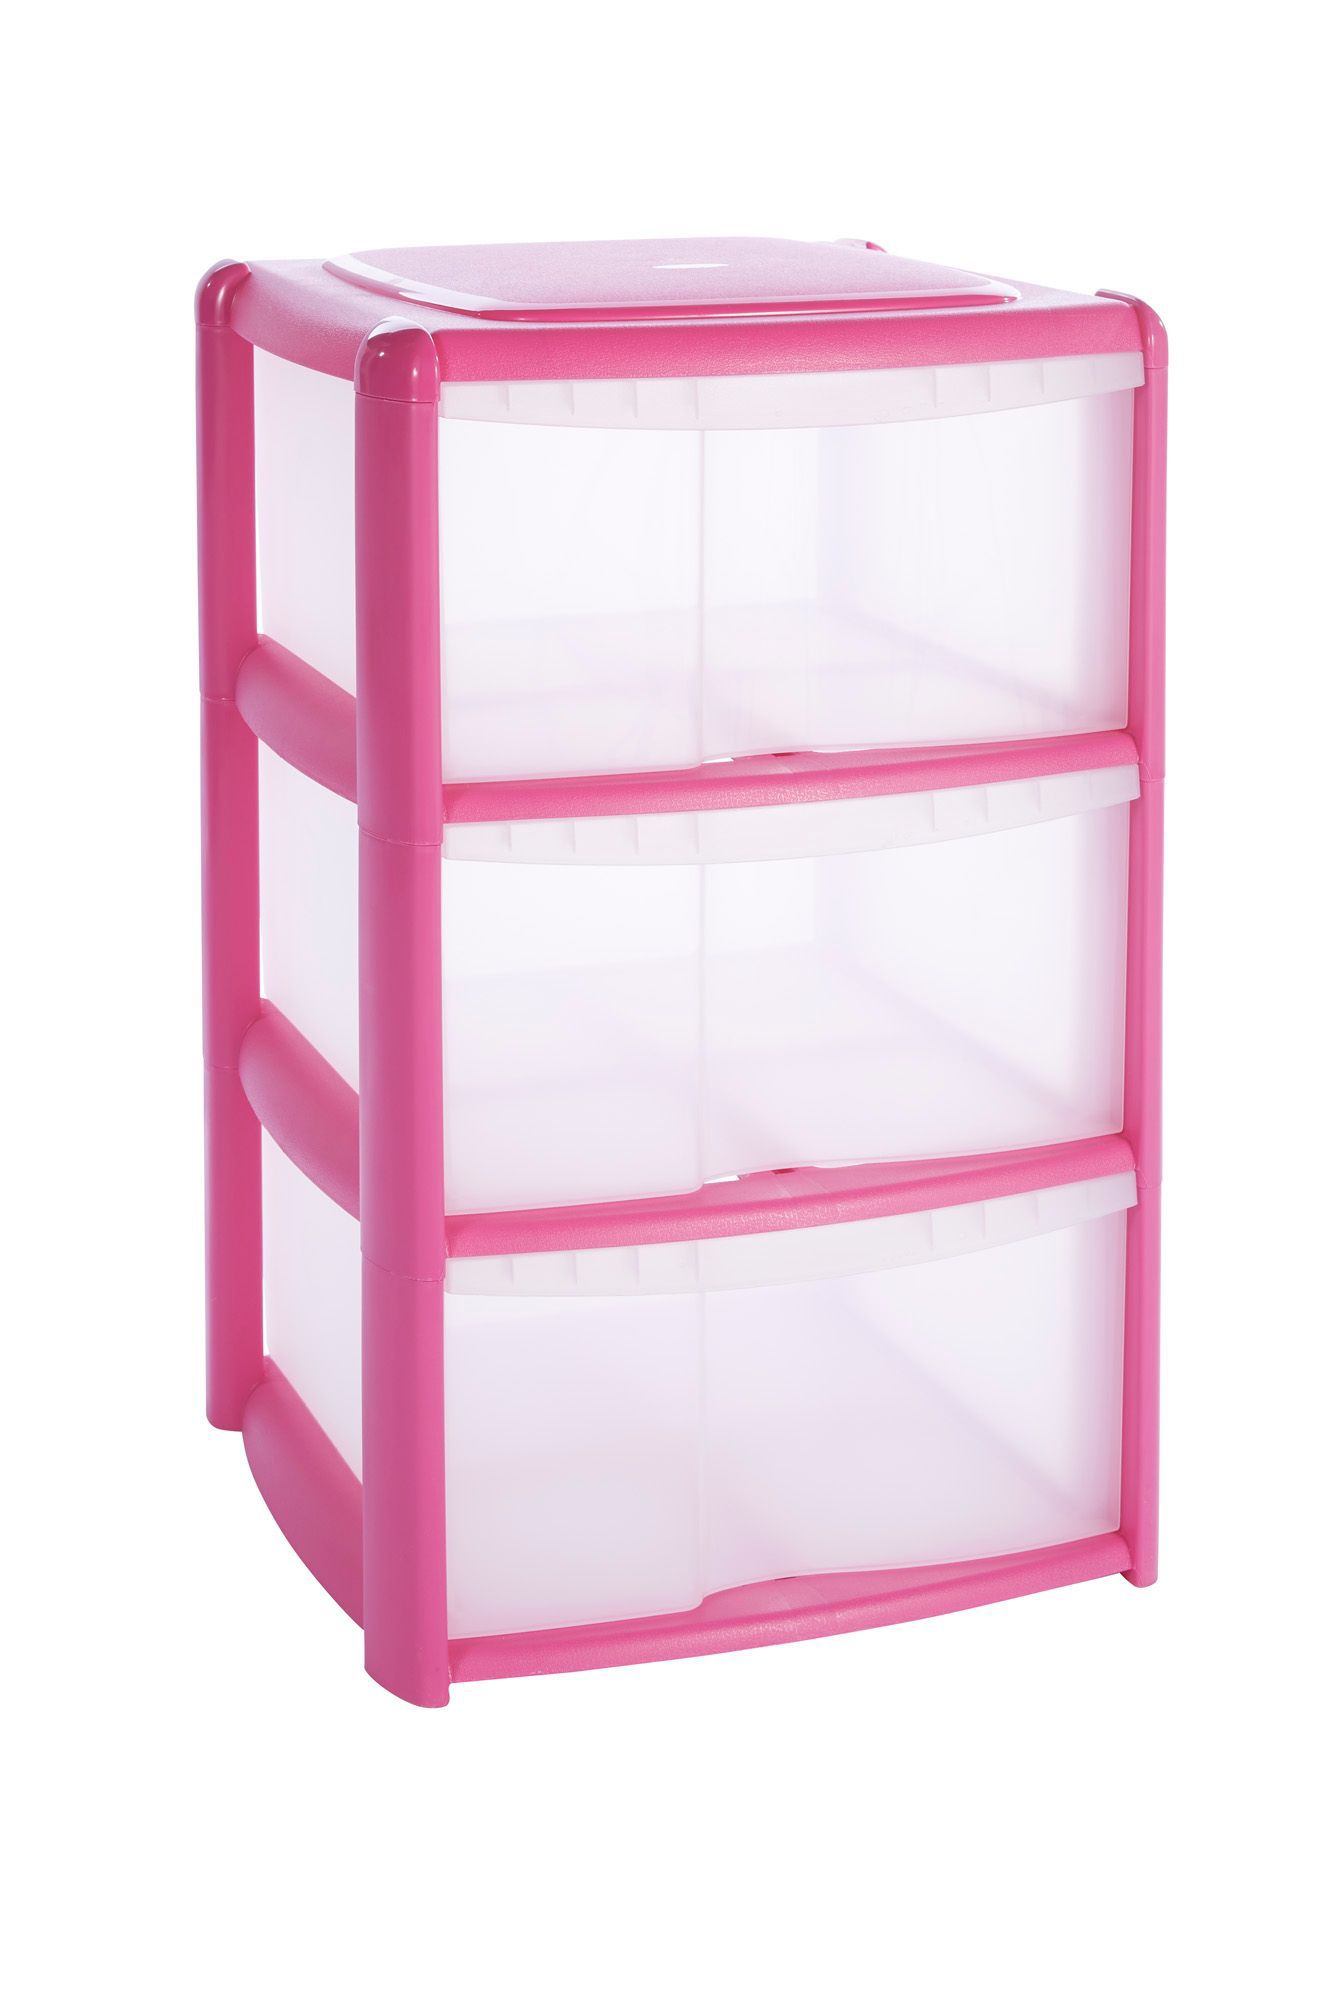 B&Q Pink Plastic Drawer tower unit Departments TradePoint